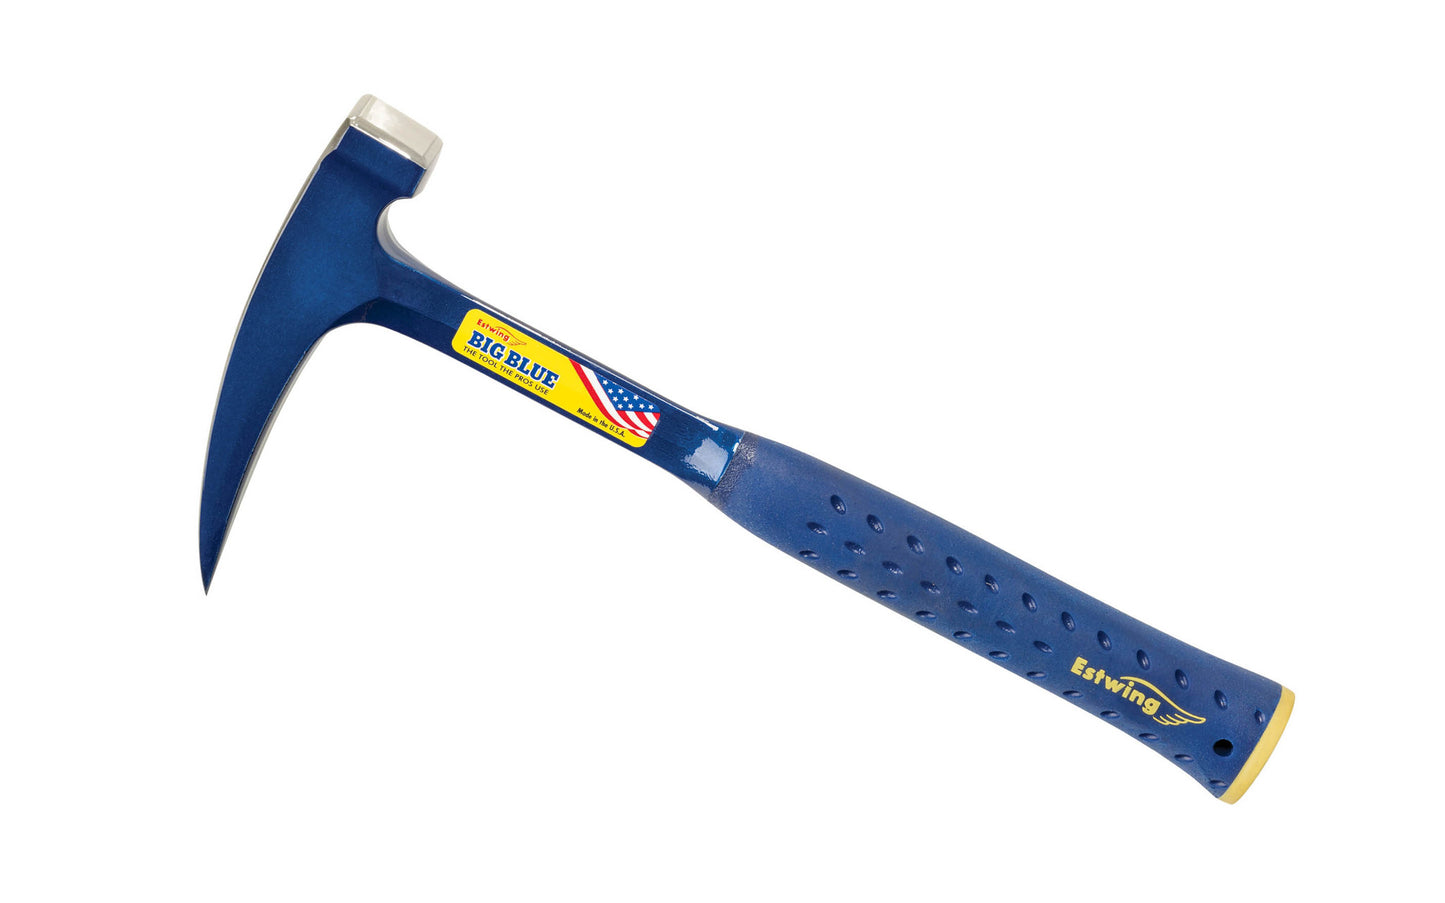 The Estwing Rock Pick Square Head Hammer With Nylon Grip is very durable & strong with a large striking square face & an anti-vibration handle. Model E6-24PC ~ Made in USA ~ 034139627289